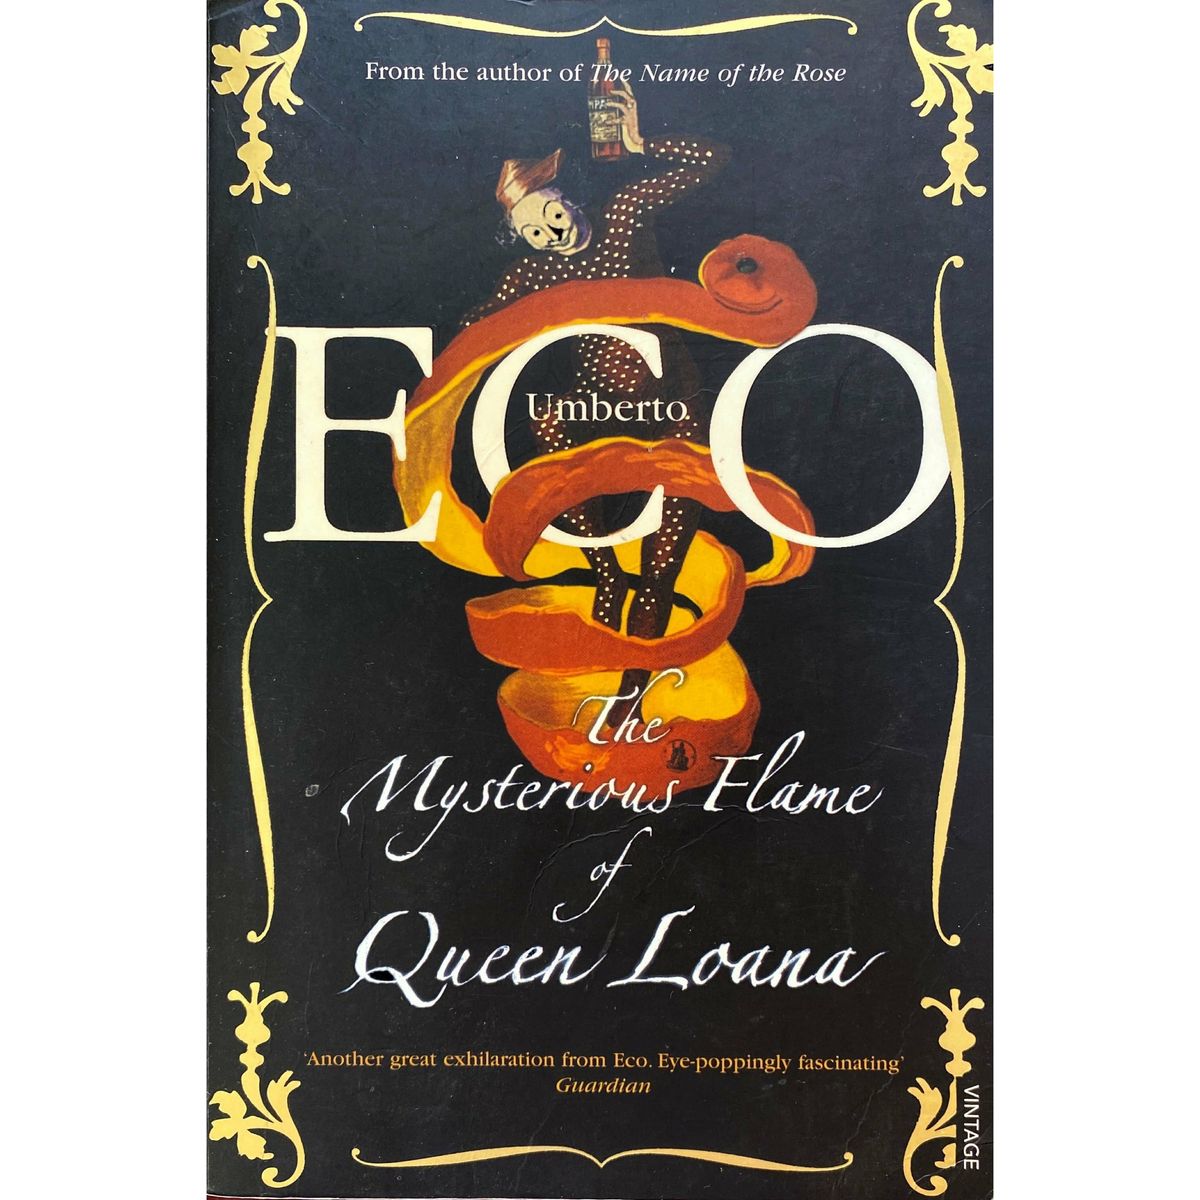 ISBN: 9780099481379 / 0099481375 - The Mysterious Flame of Queen Loana by Umberto Eco [2006]